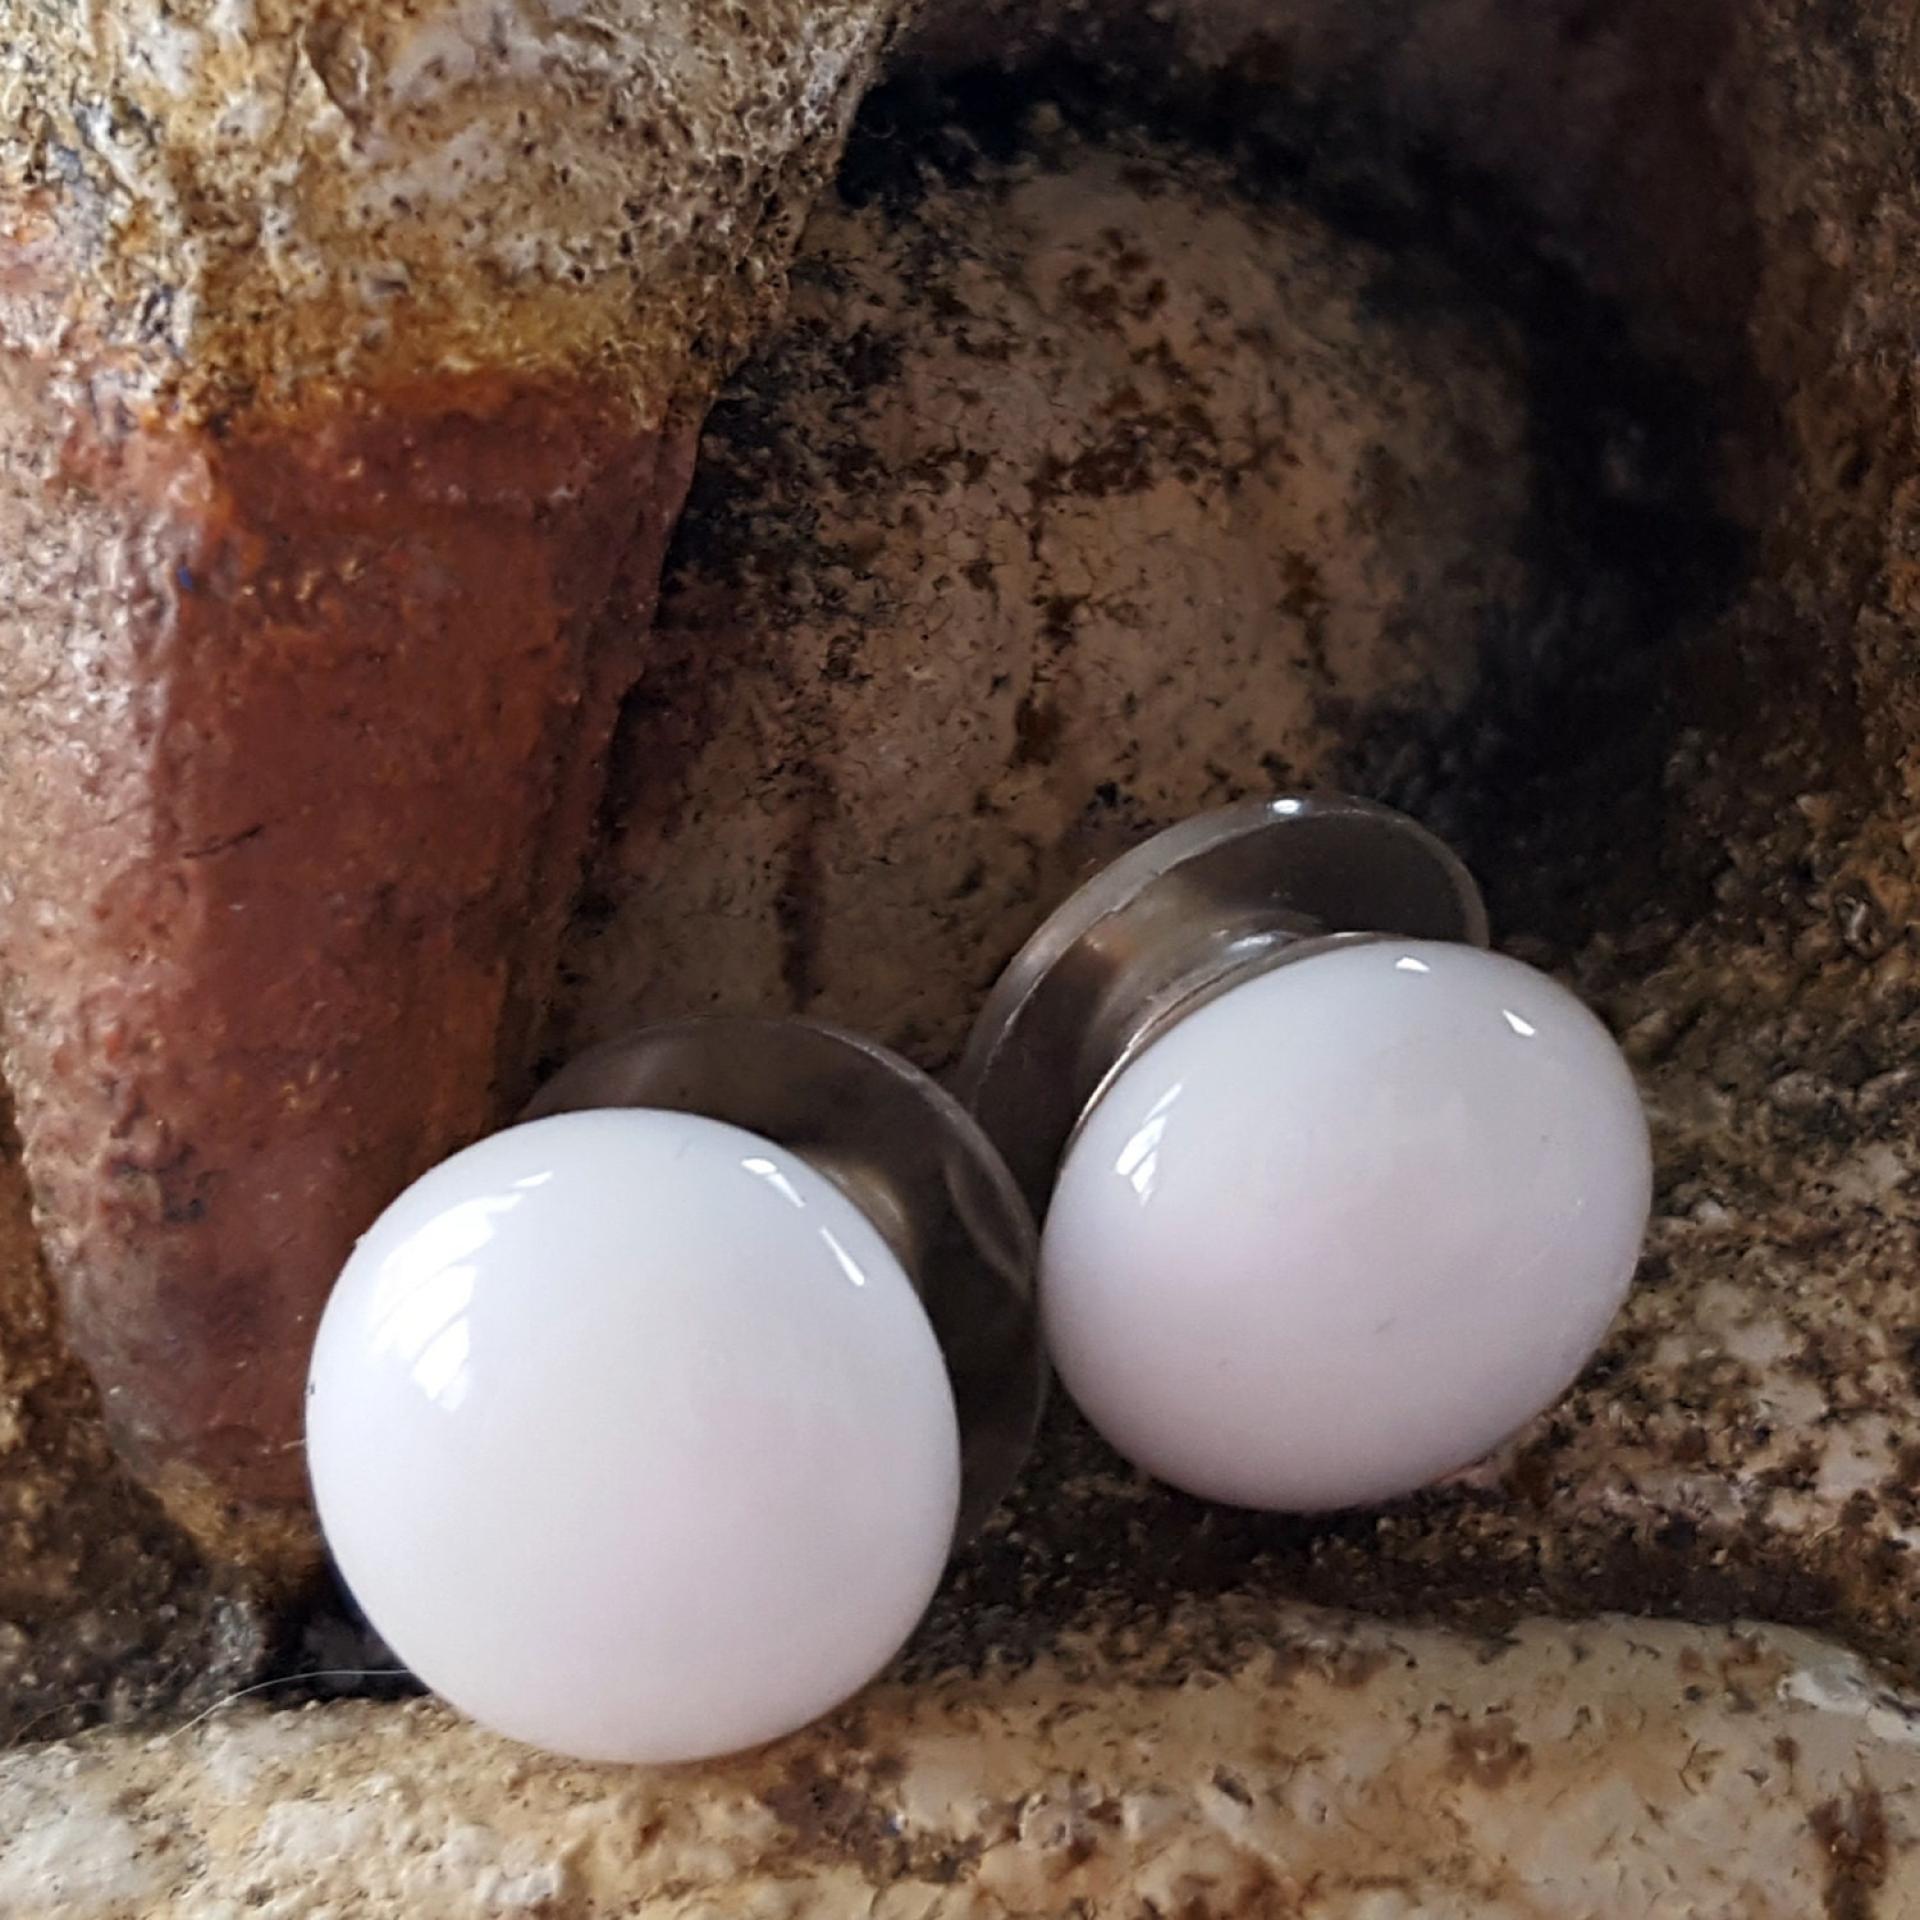 White Stud Earrings, Sterling Silver Posts, Fused Glass 